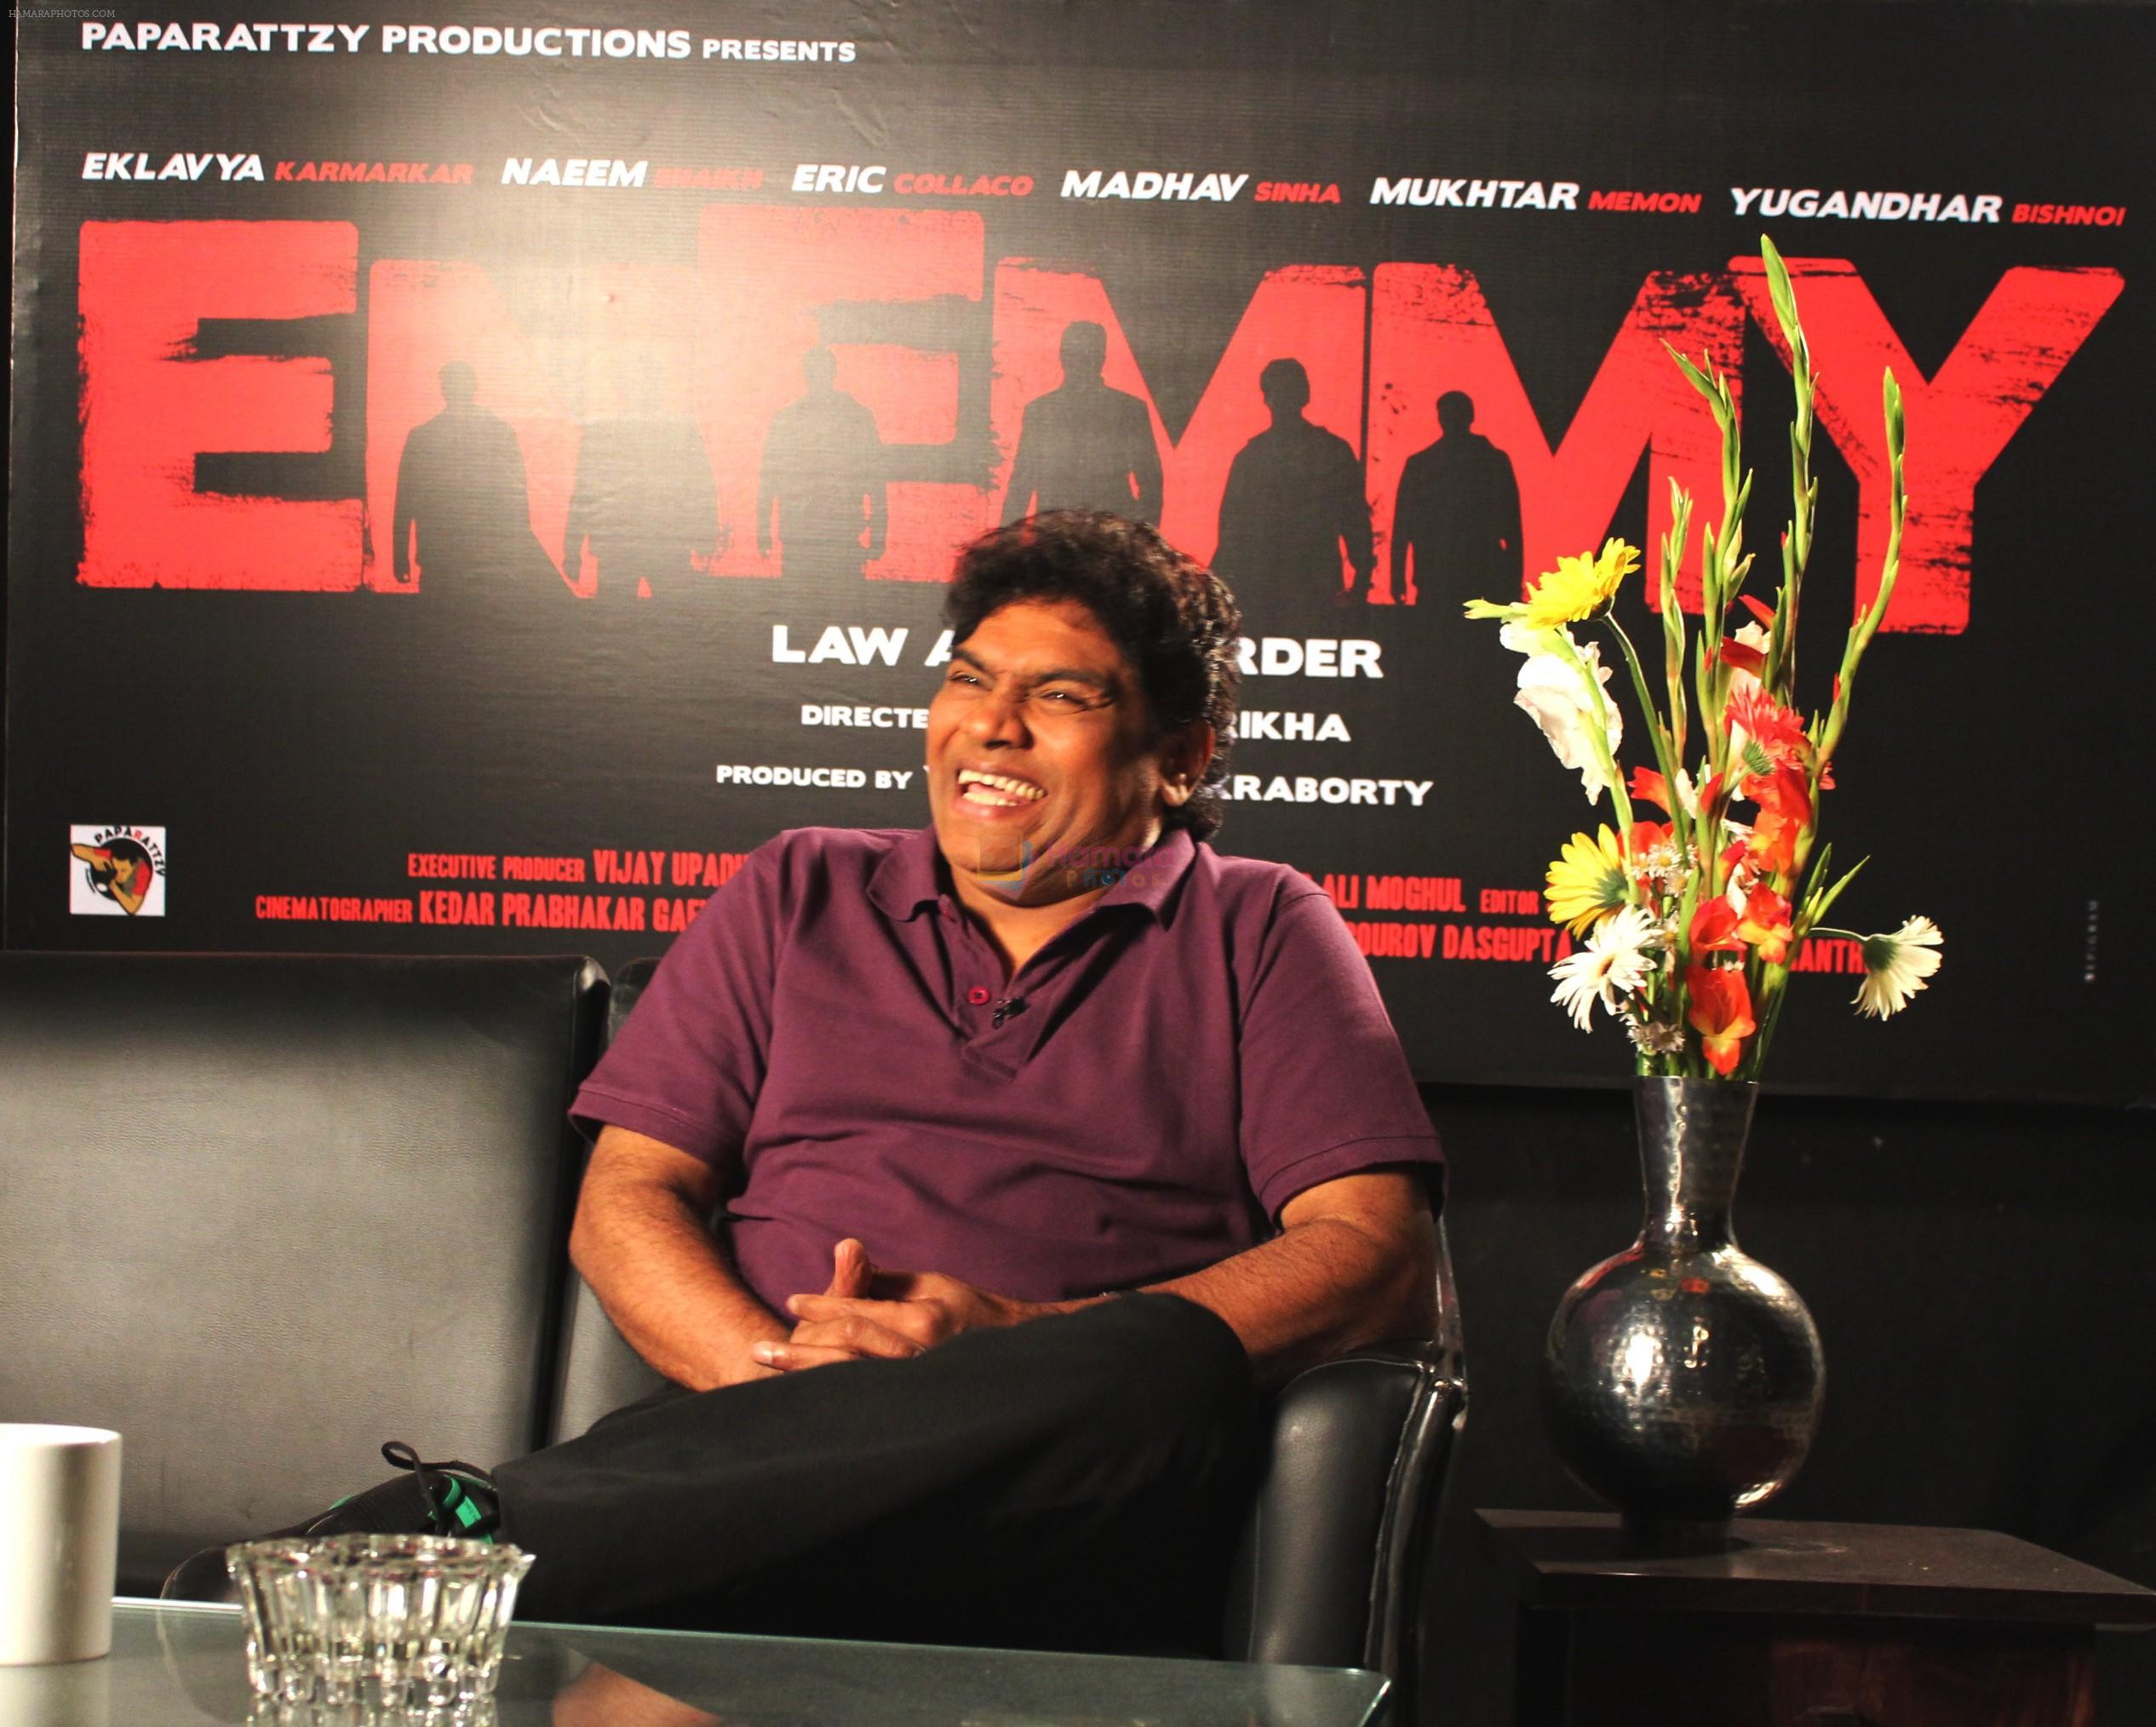 Johnny Lever at the making shoot of Paparattzy Productions_ ENEMMY